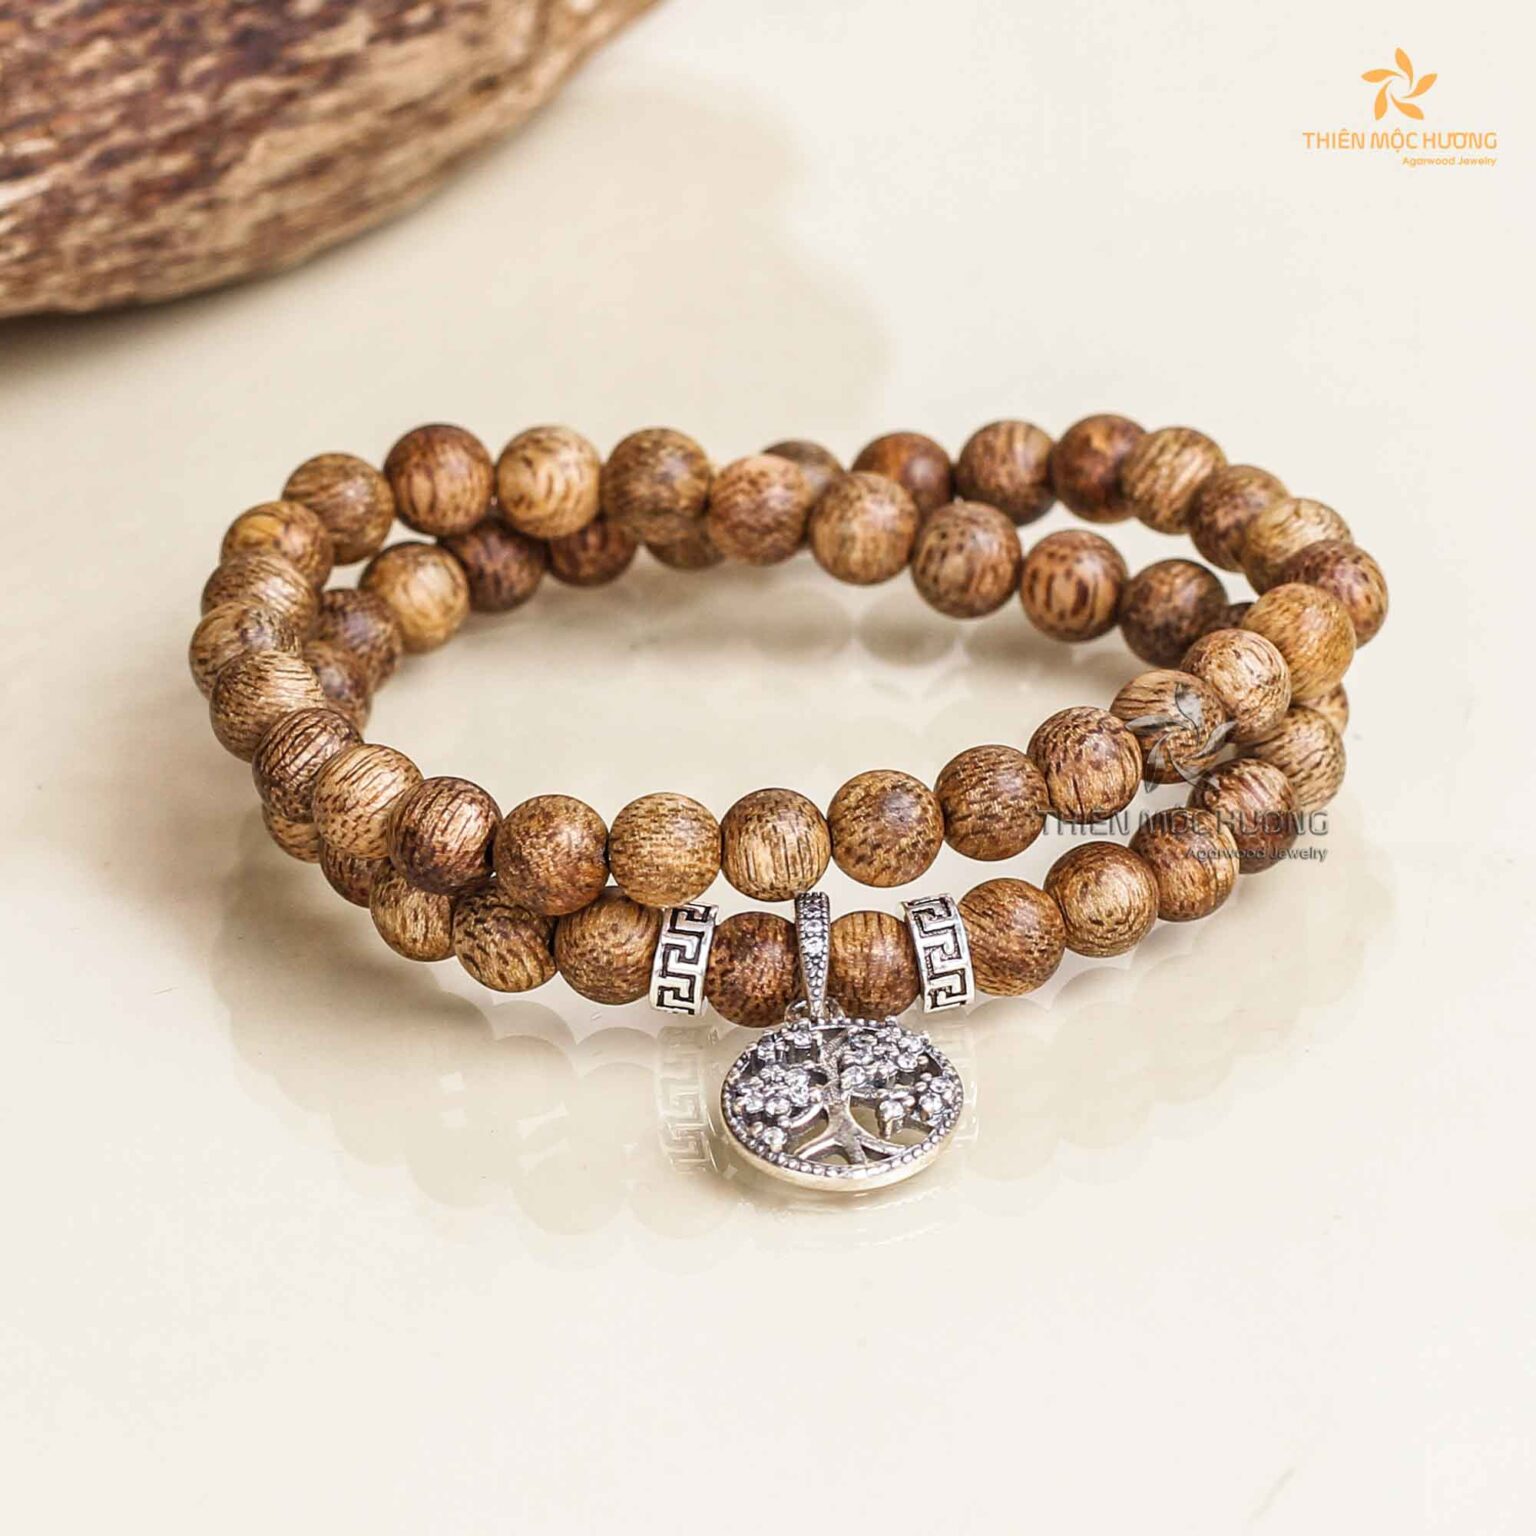 Happy Family Agarwood Bracelet with Silver S925 - Vietnamese Toc Agarwood - Thien Moc Huong